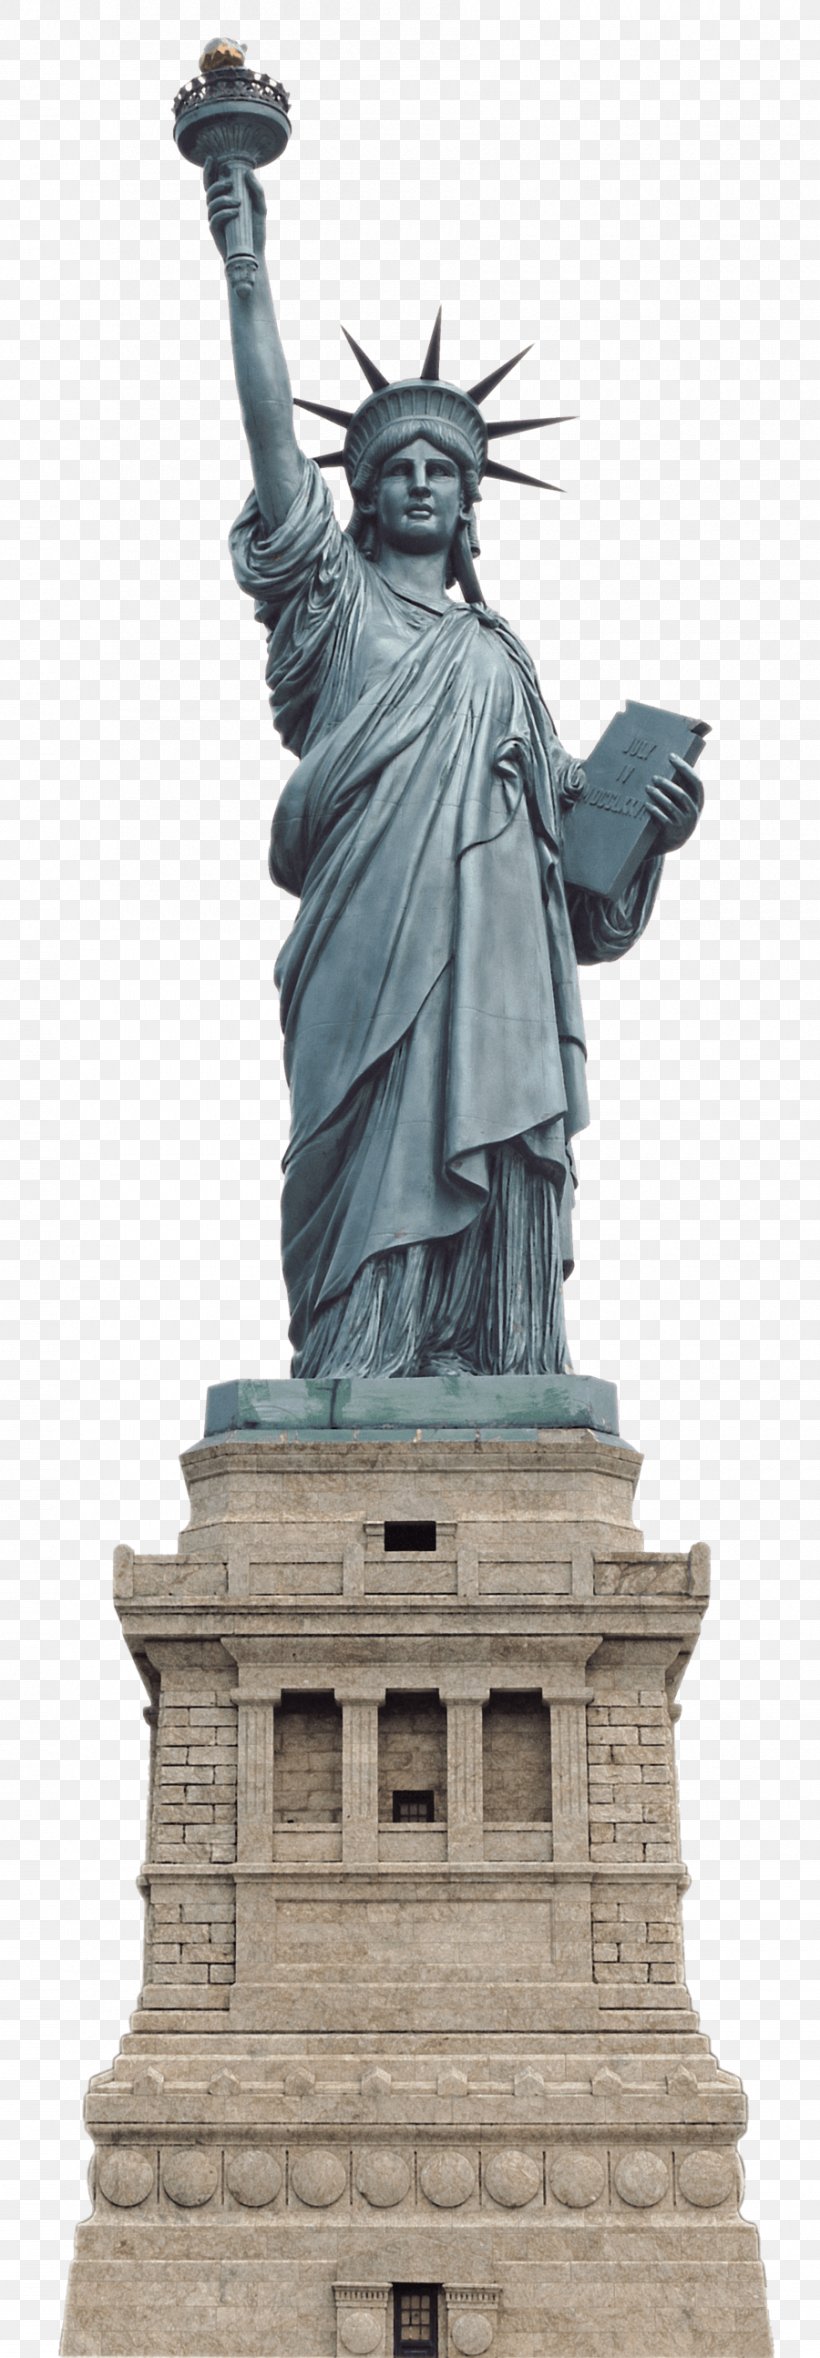 Statue Of Liberty Monument Clip Art, PNG, 900x2589px, Statue Of Liberty, Building, Classical Sculpture, Historic Site, Landmark Download Free